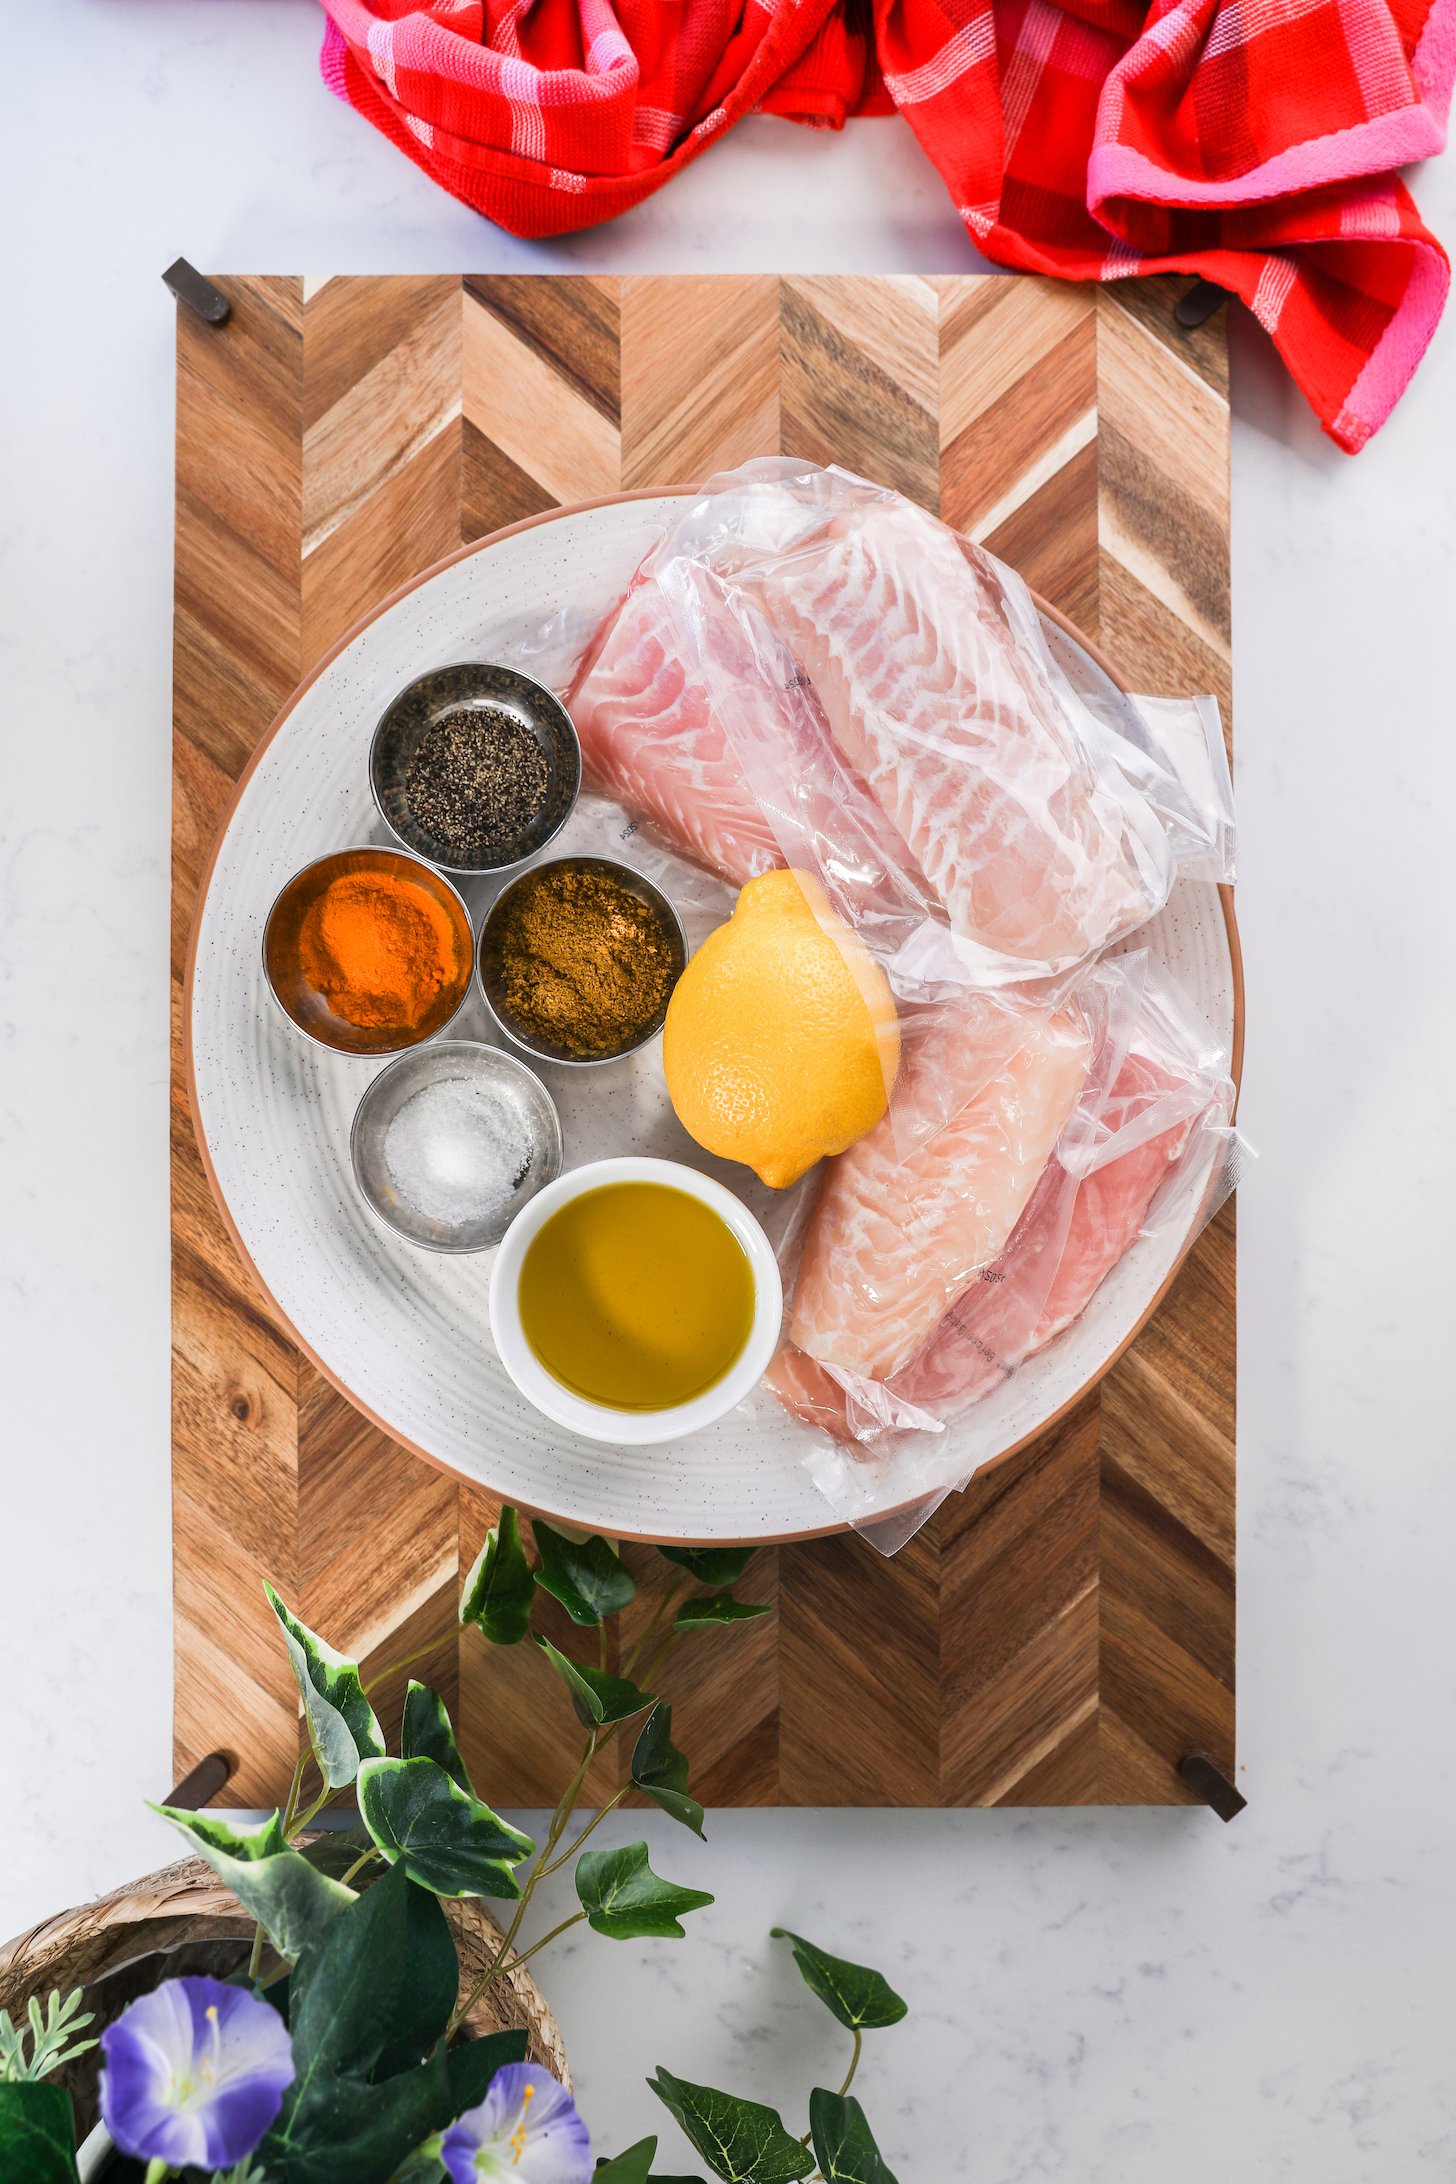 A collection of ingredients including white fish fillets, spices, oil and lemon.